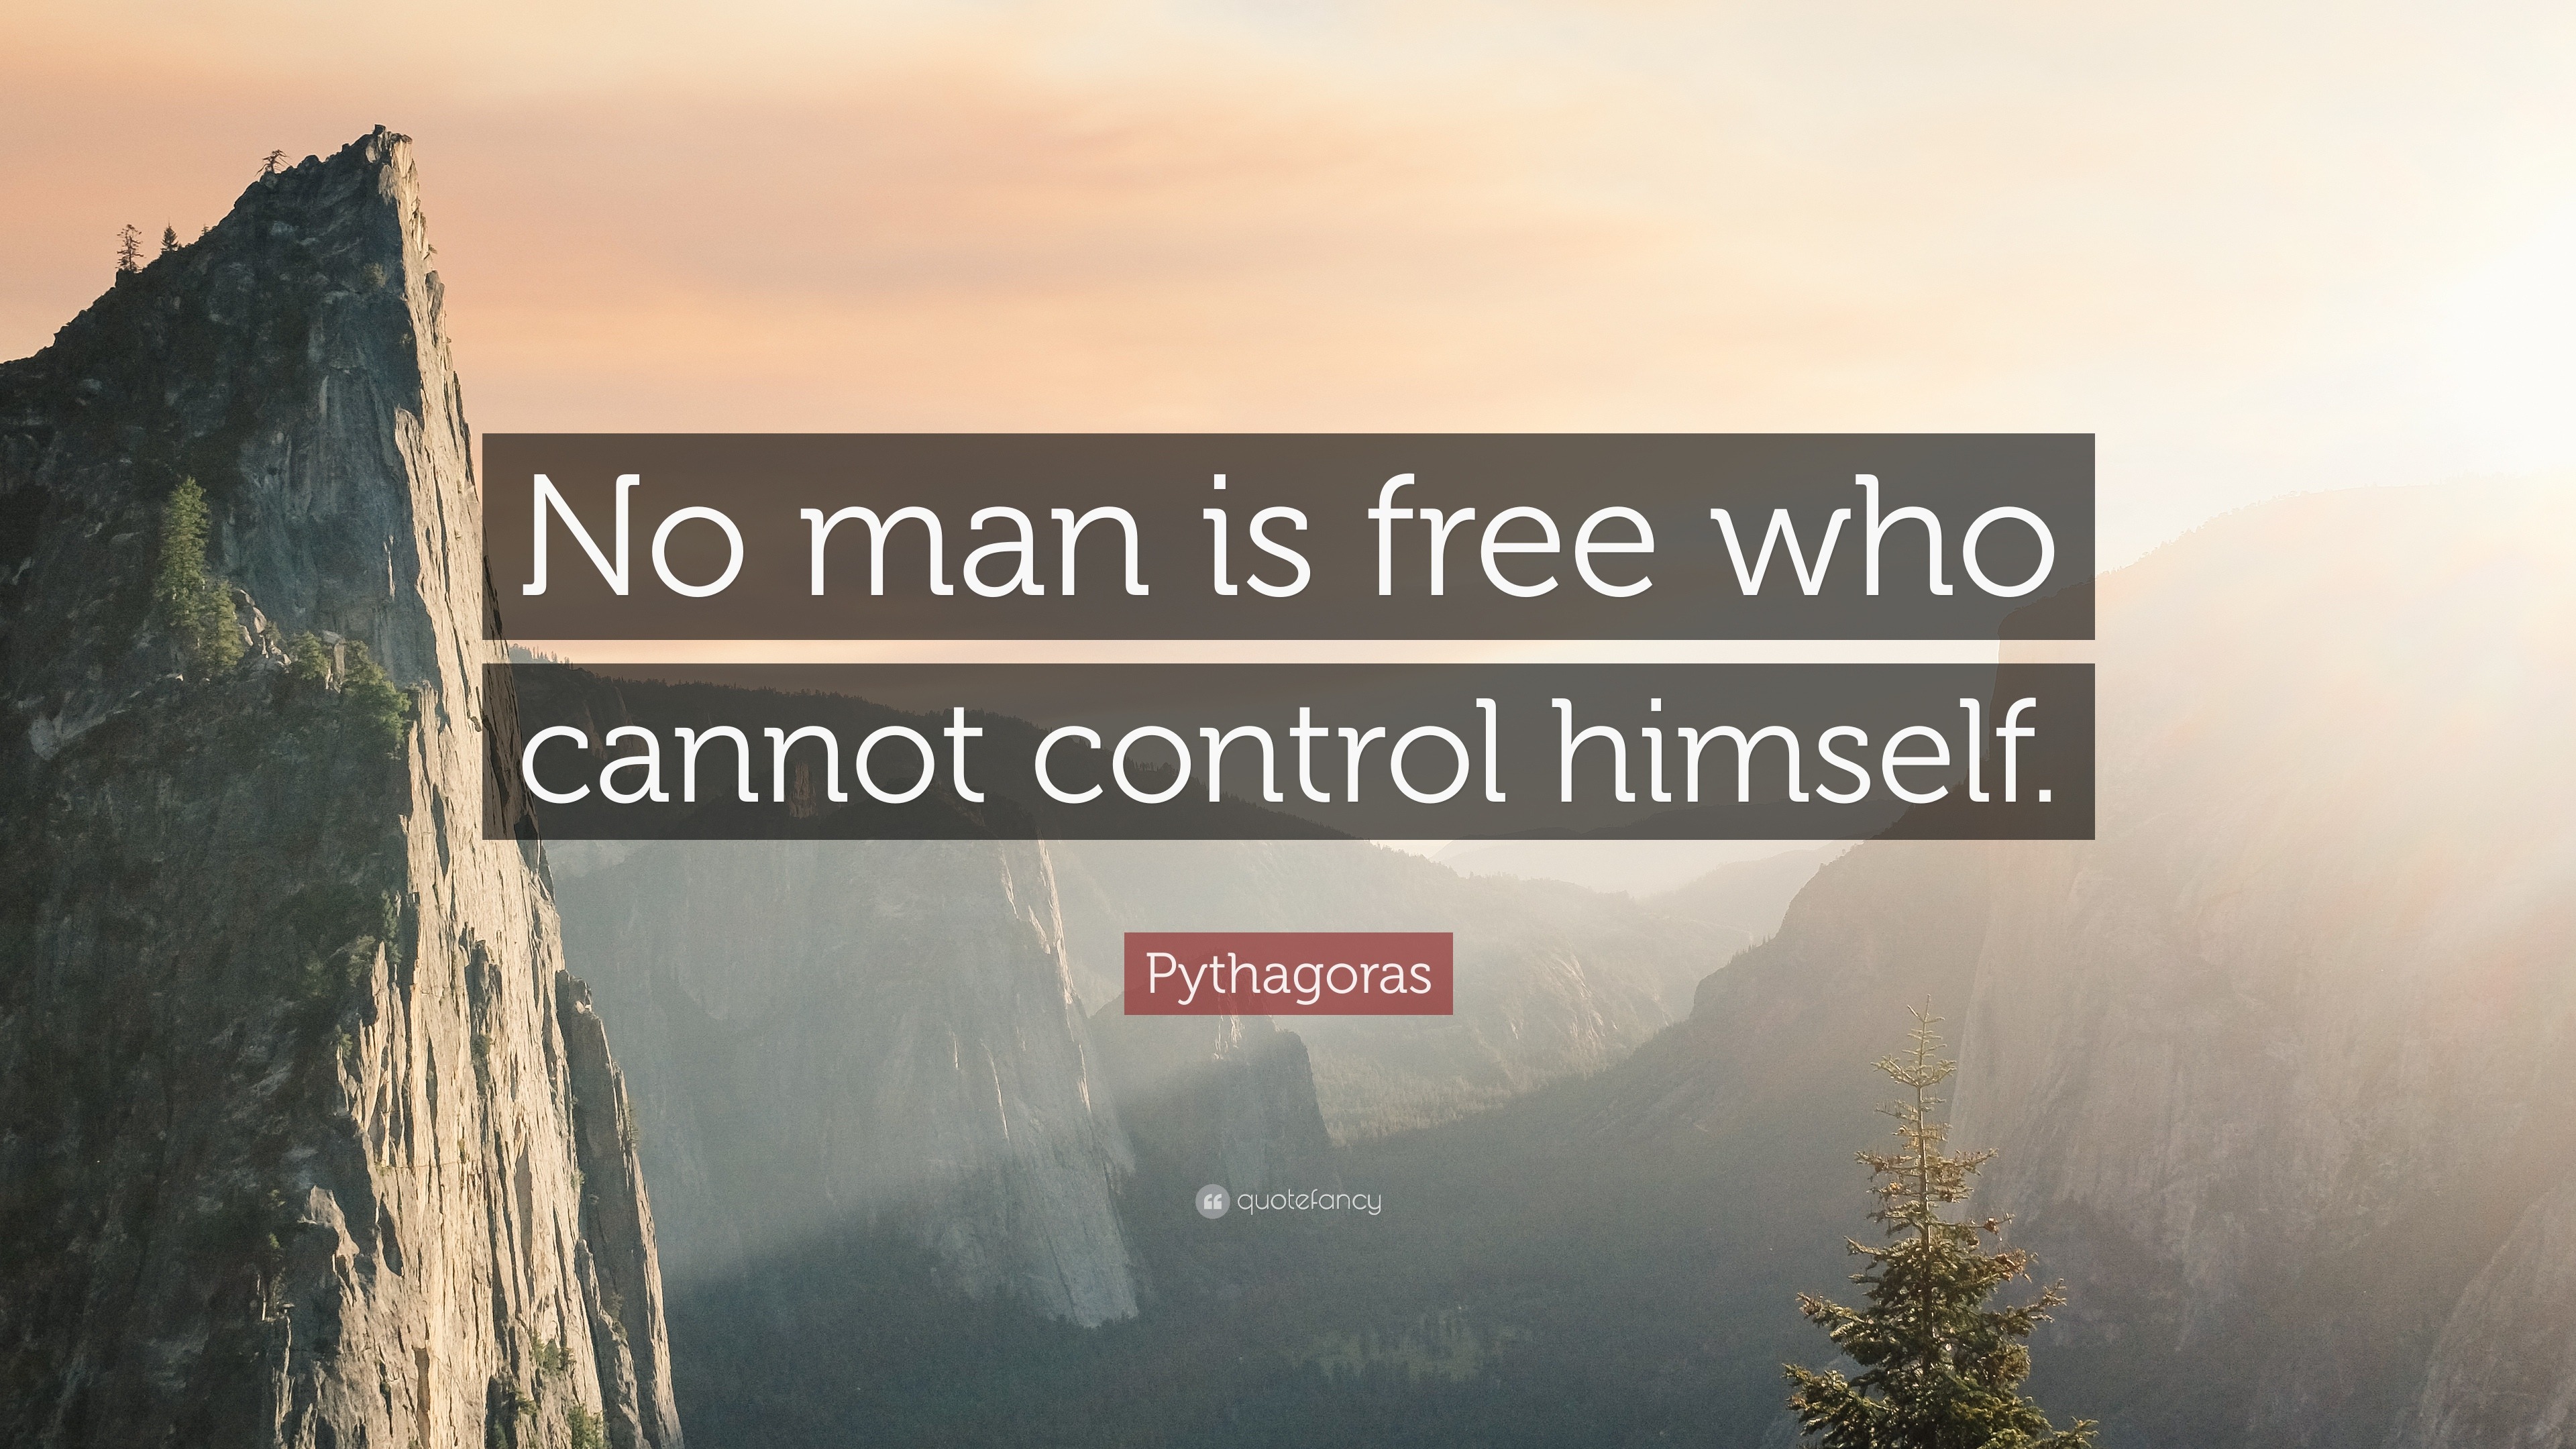 Pythagoras Quote: “No man is free who cannot control himself.”